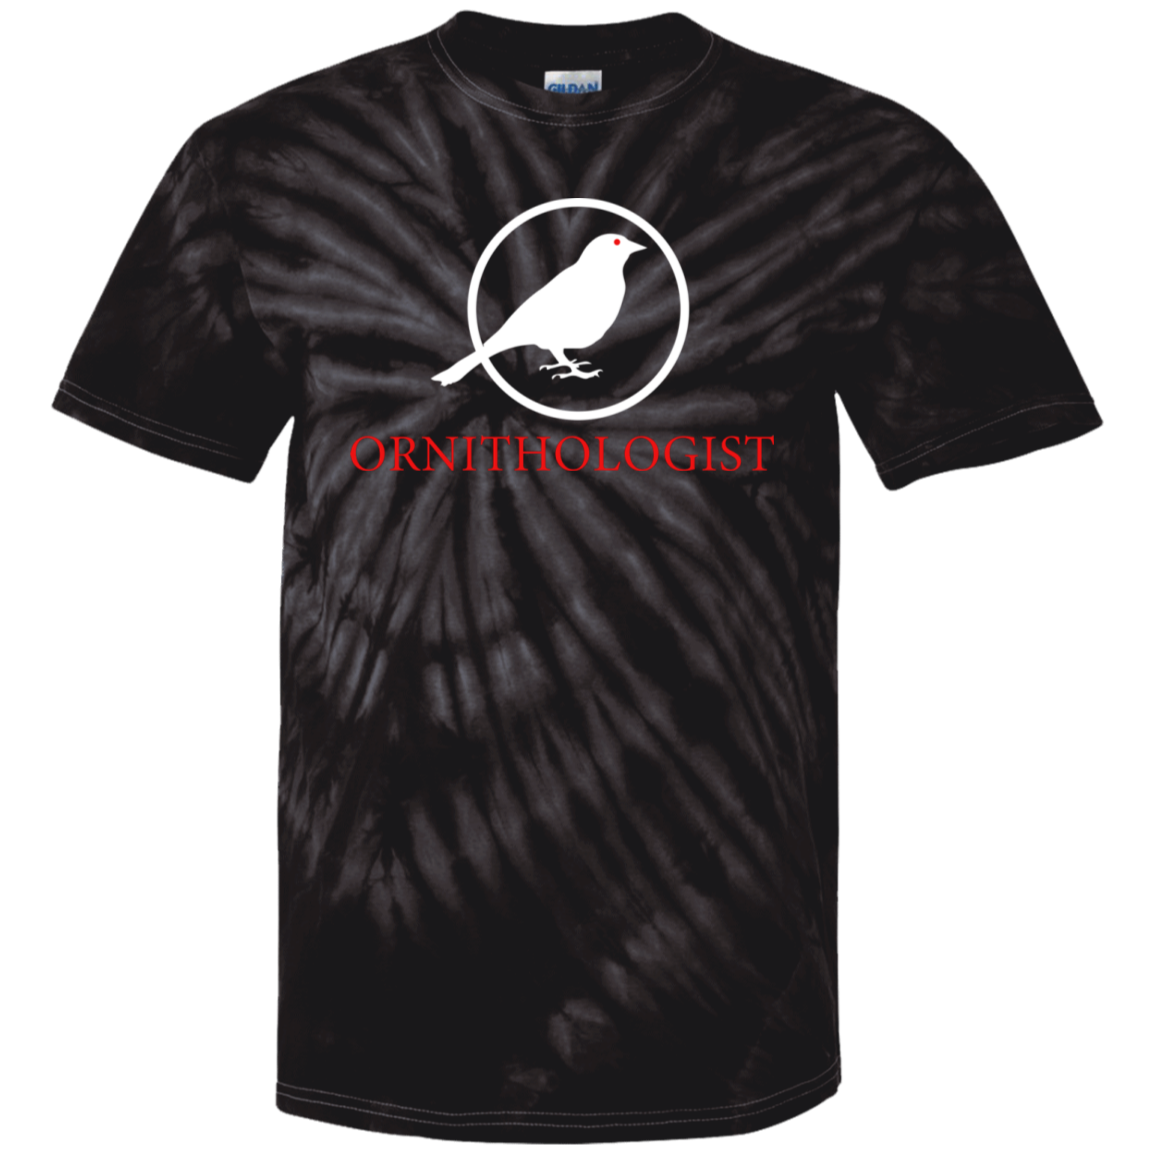 OPG Custom Design # 24. Ornithologist. A person who studies or is an expert on birds. 100% Cotton Tie Dye T-Shirt